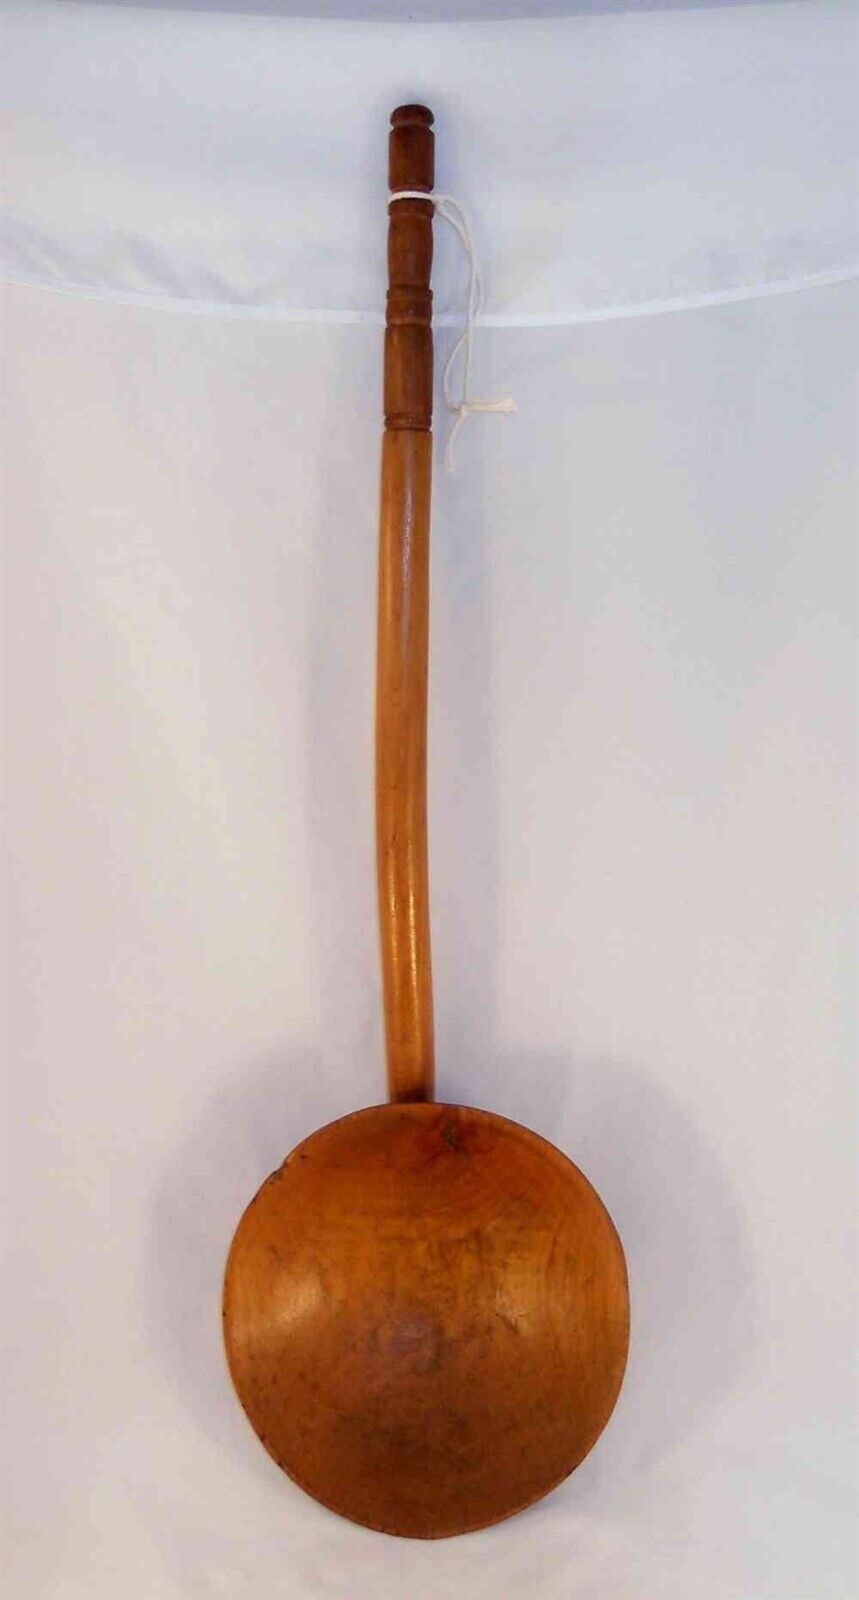 Antique Carved Wood Long Handled Ladle With Large Bowl and Light Brown Finish